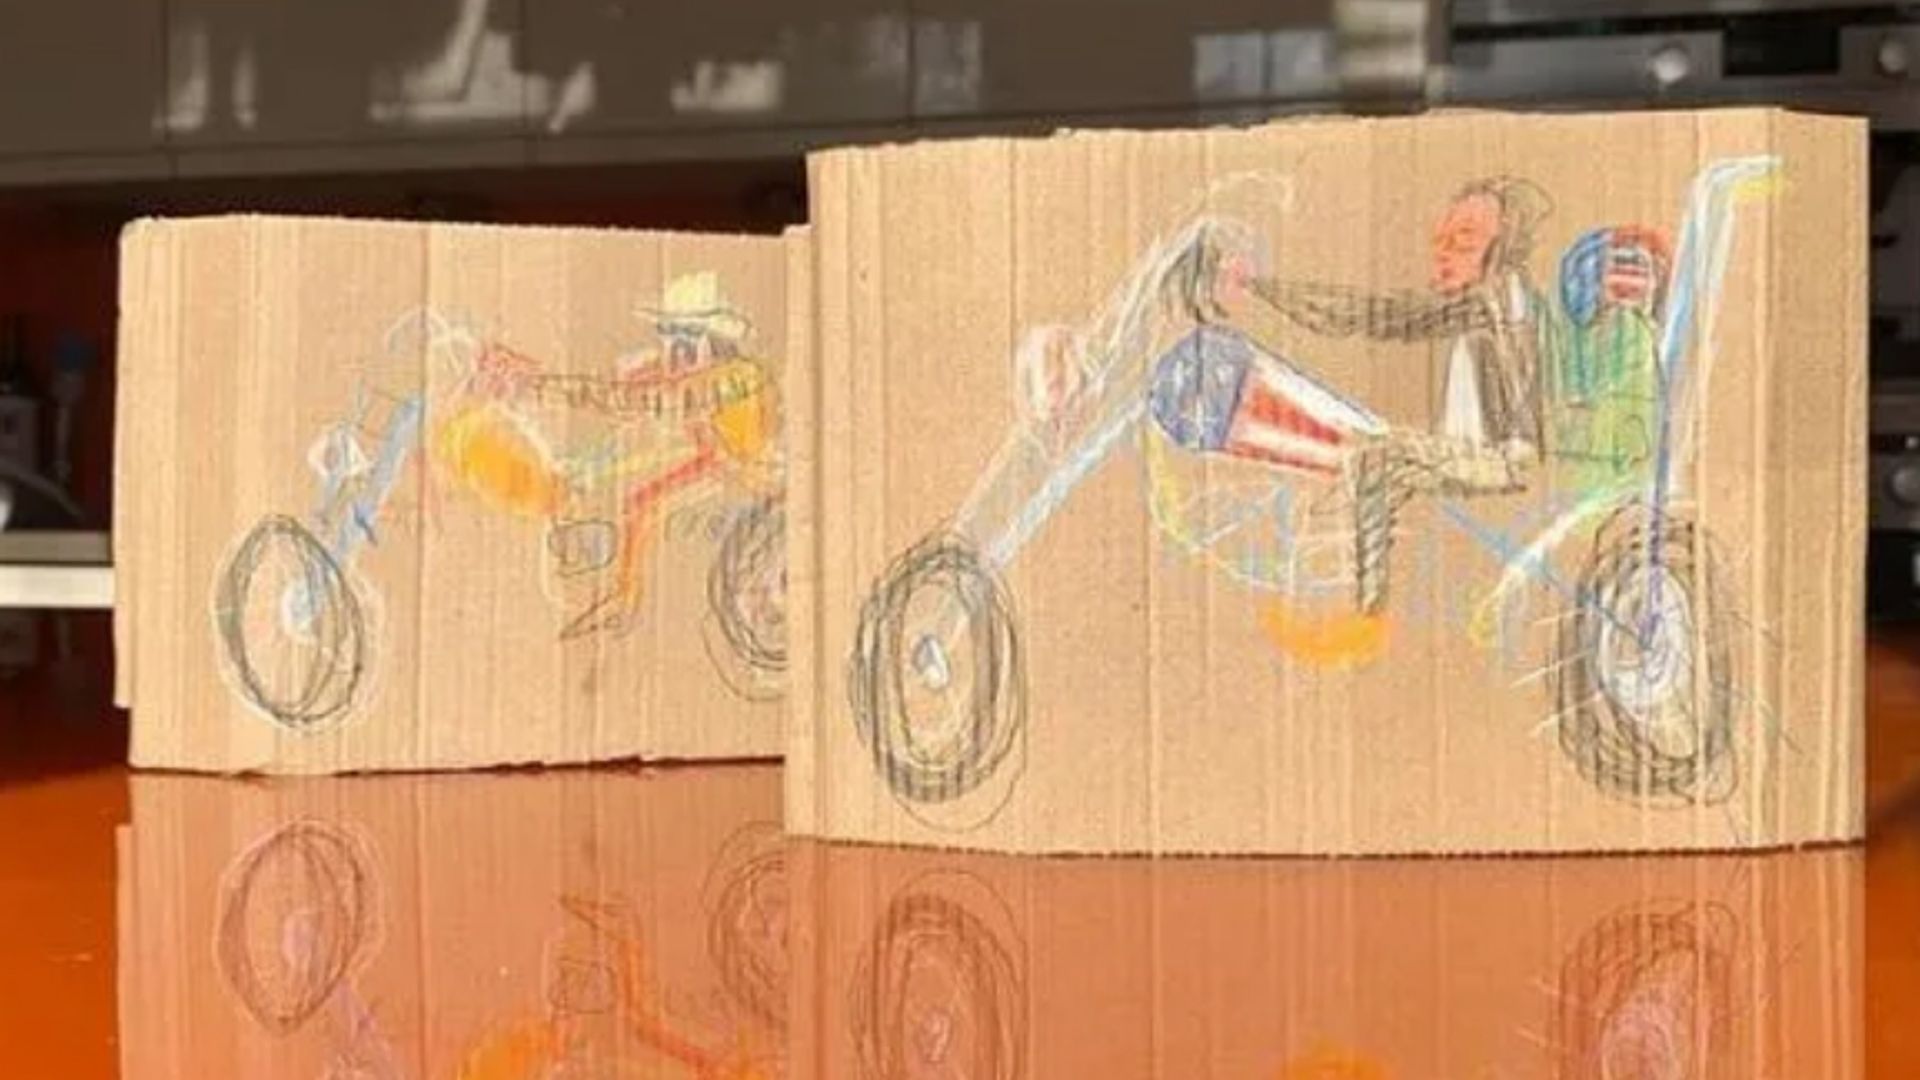 Two drawings on cardboard of people riding motorcycles